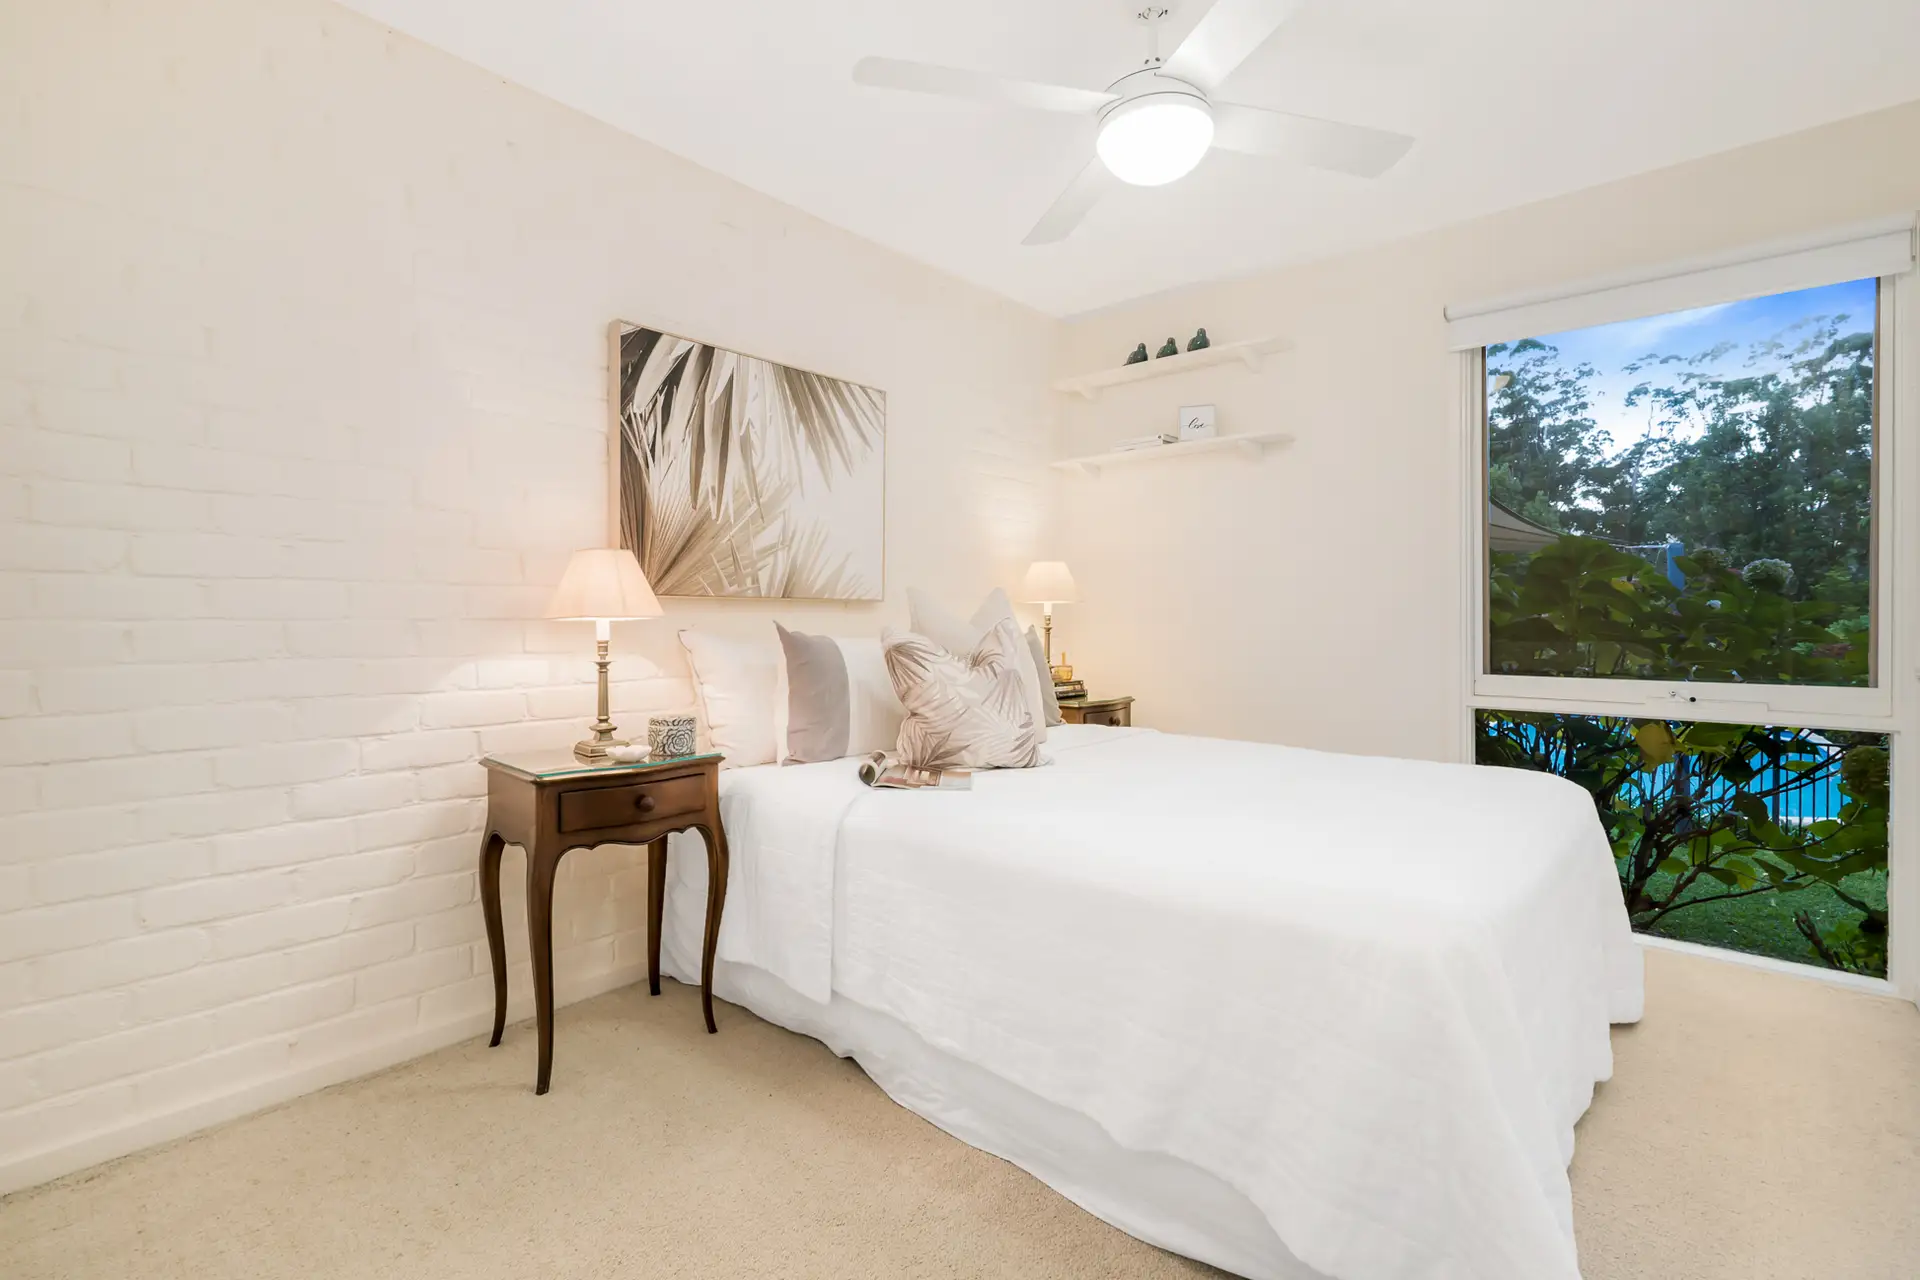 Photo #8: 6 Betts Place, West Pennant Hills - Sold by Louis Carr Real Estate